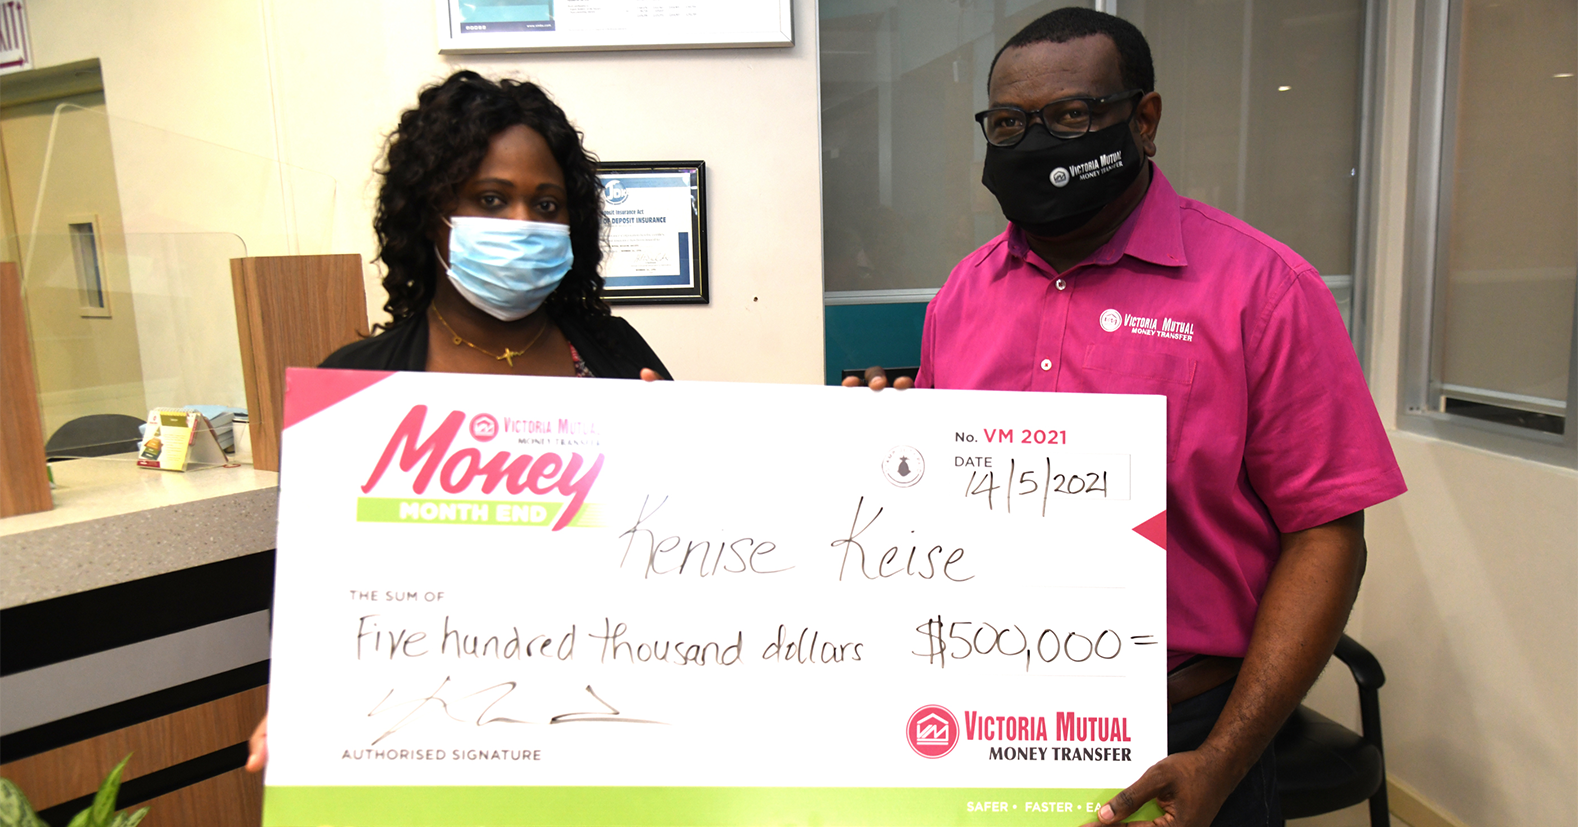 Kenise Keise: Michael Howard (right), CEO, VM Money Transfer Services (VMTS), presents Kenise Keise, 2nd place winner in the VMTS Month End promotion, with a cheque of $500,000, at the VMTS location inside the VMBS Ocho Rios Branch.